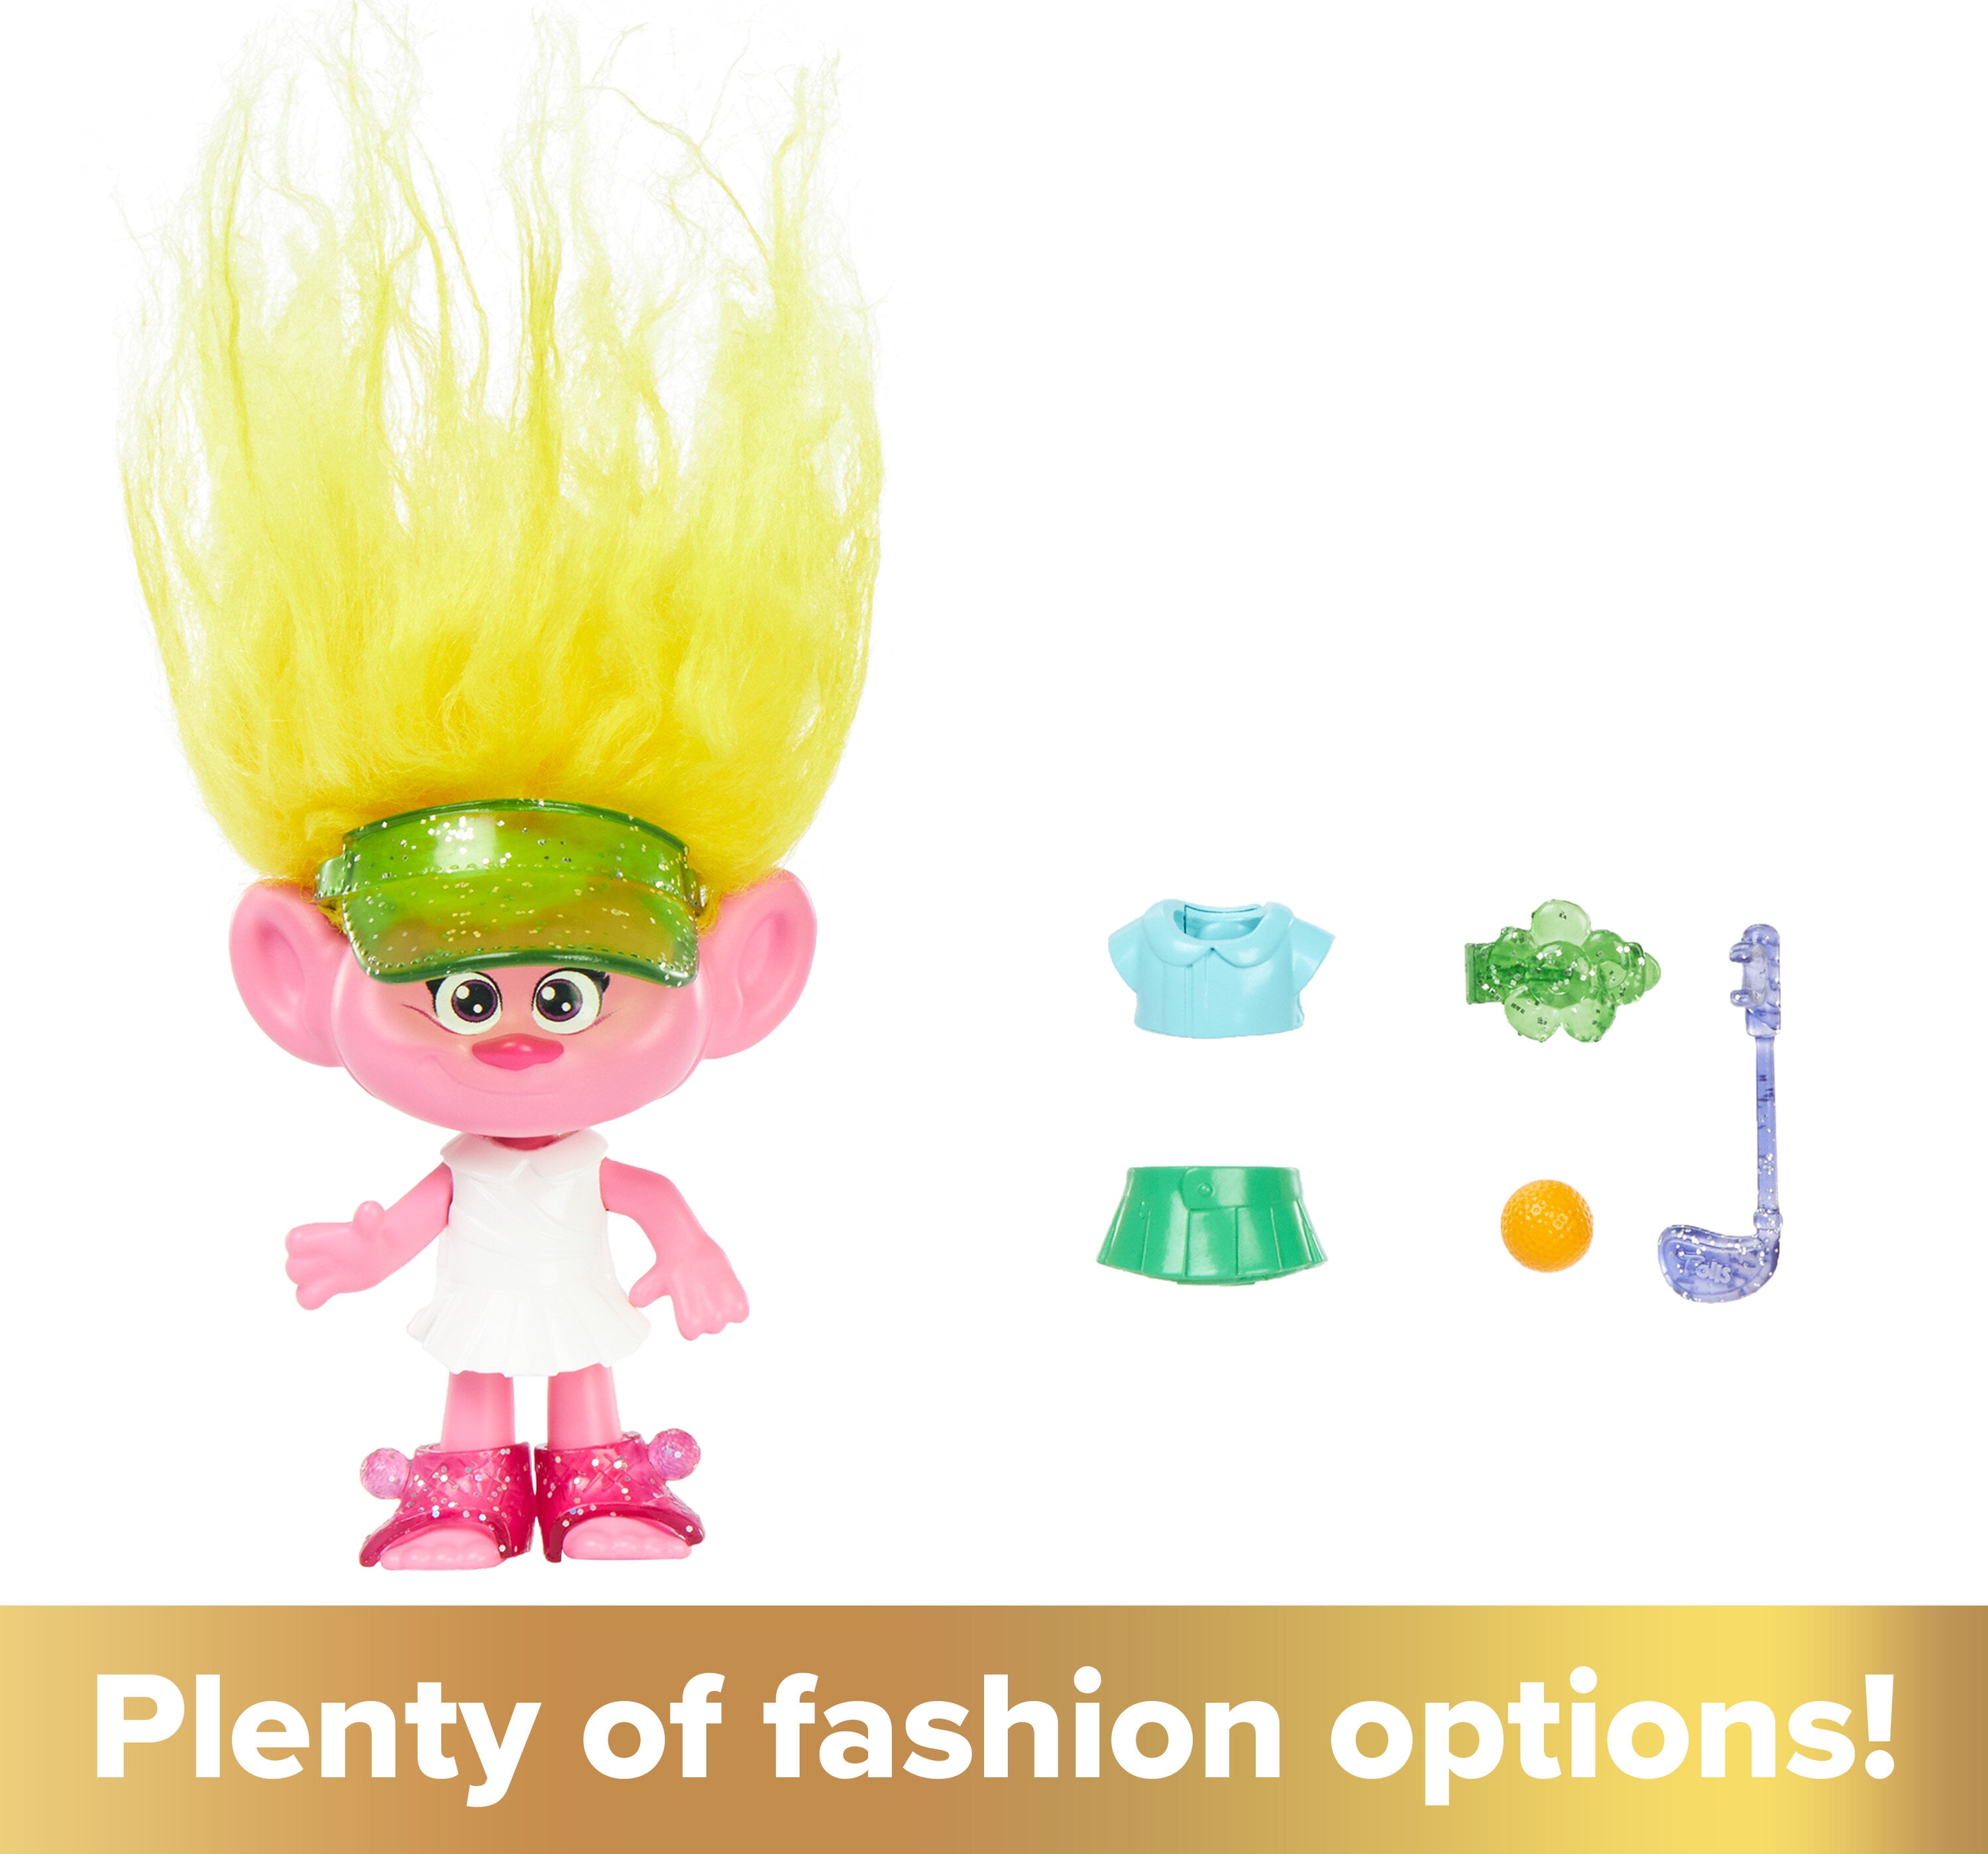 Fun Trolls Movie Inspired Products Your Kids Will Enjoy